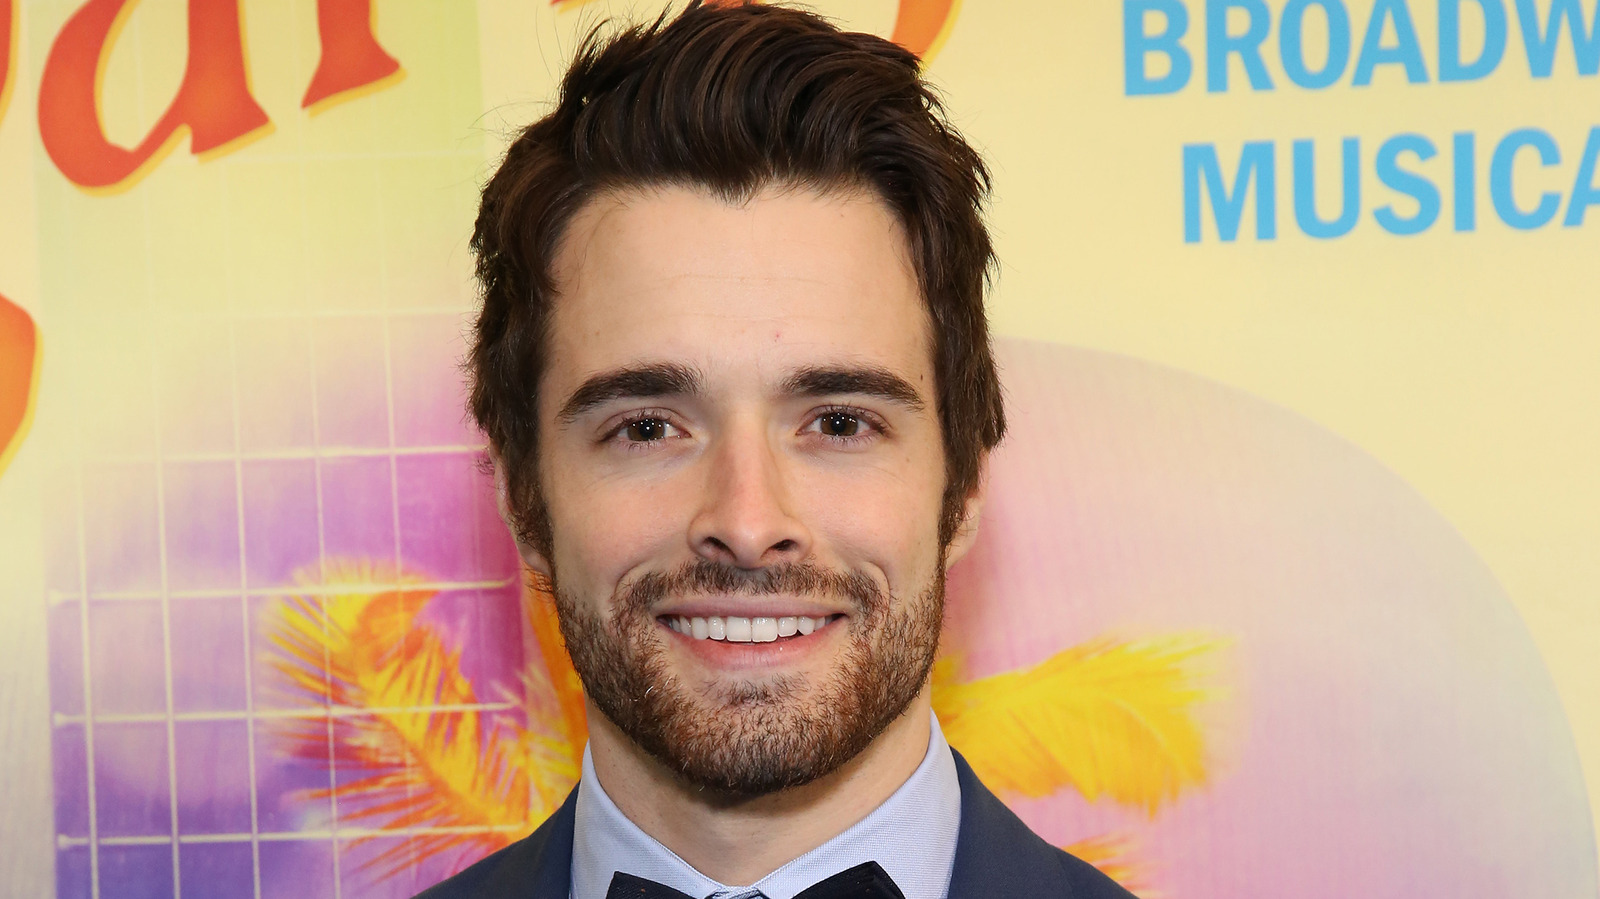 heres who hallmark star corey cott is married to in real life